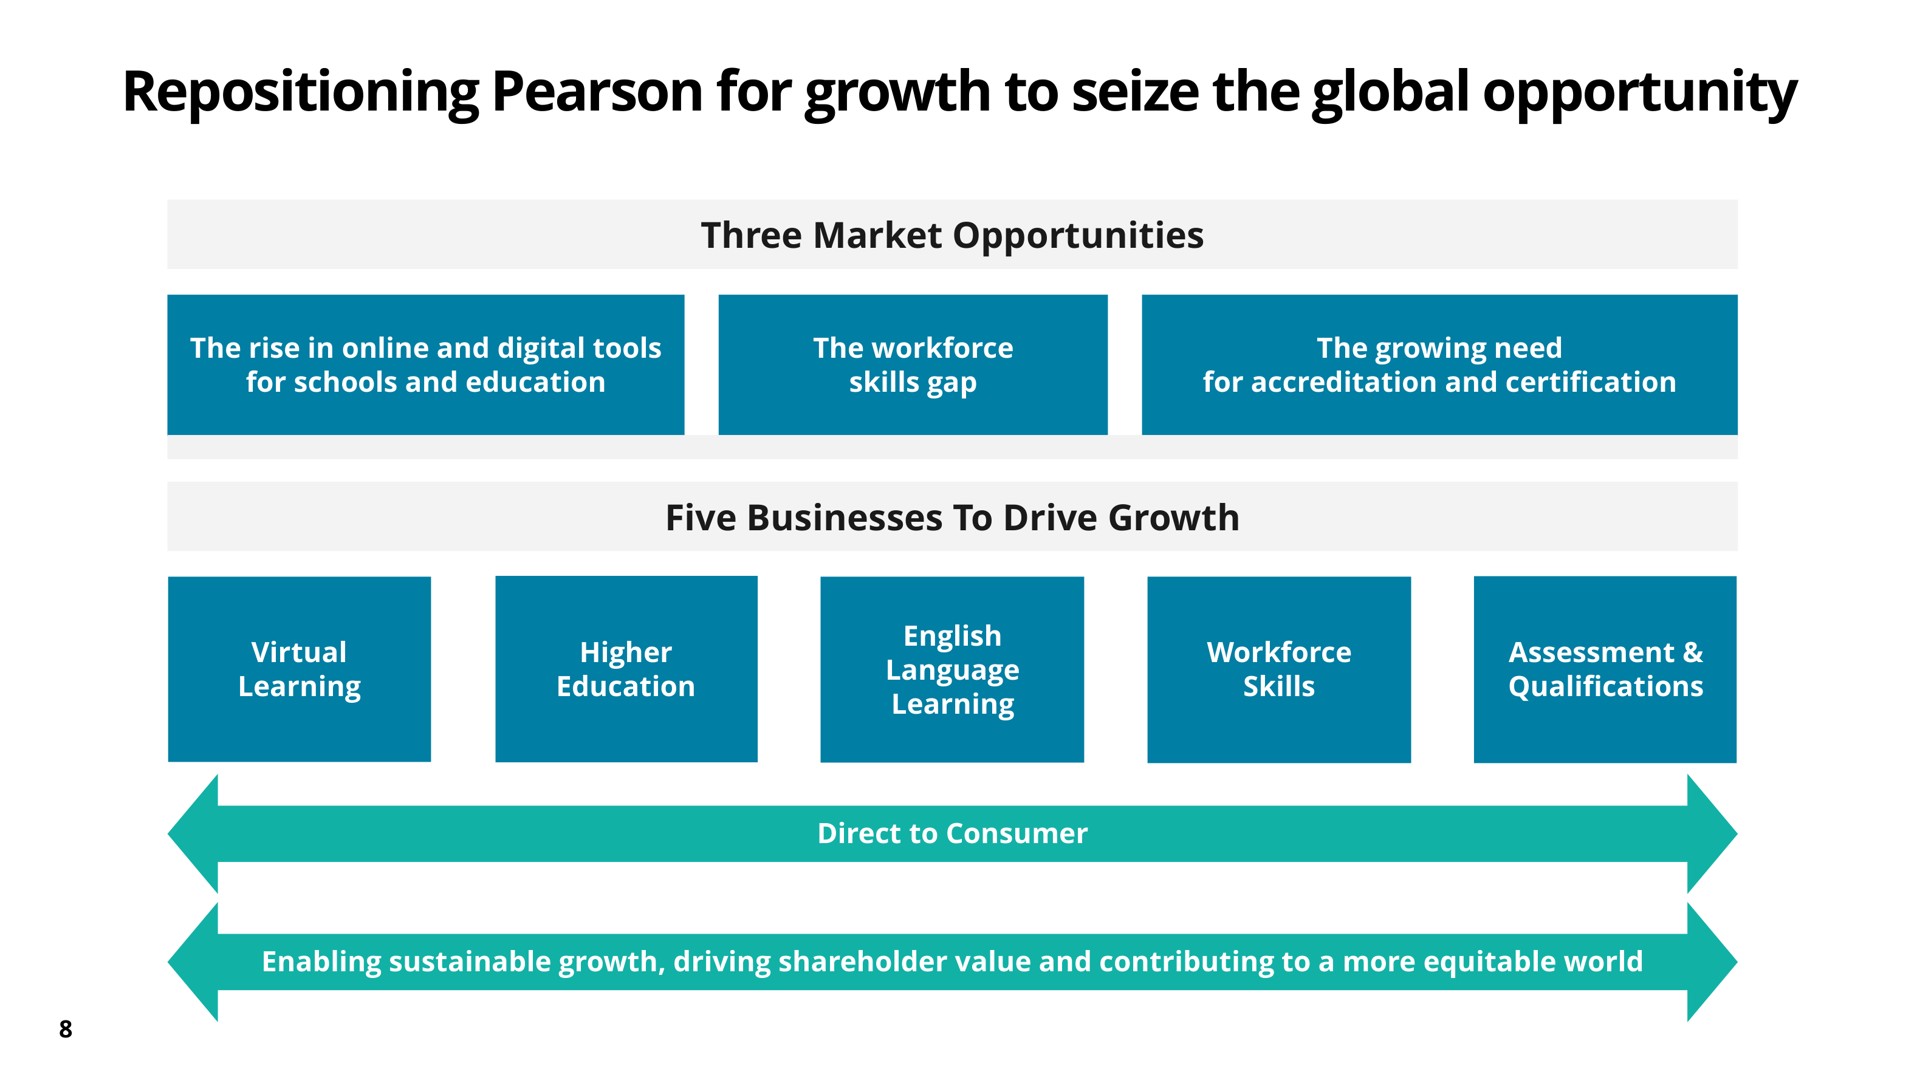 repositioning for growth to seize the global opportunity | Pearson